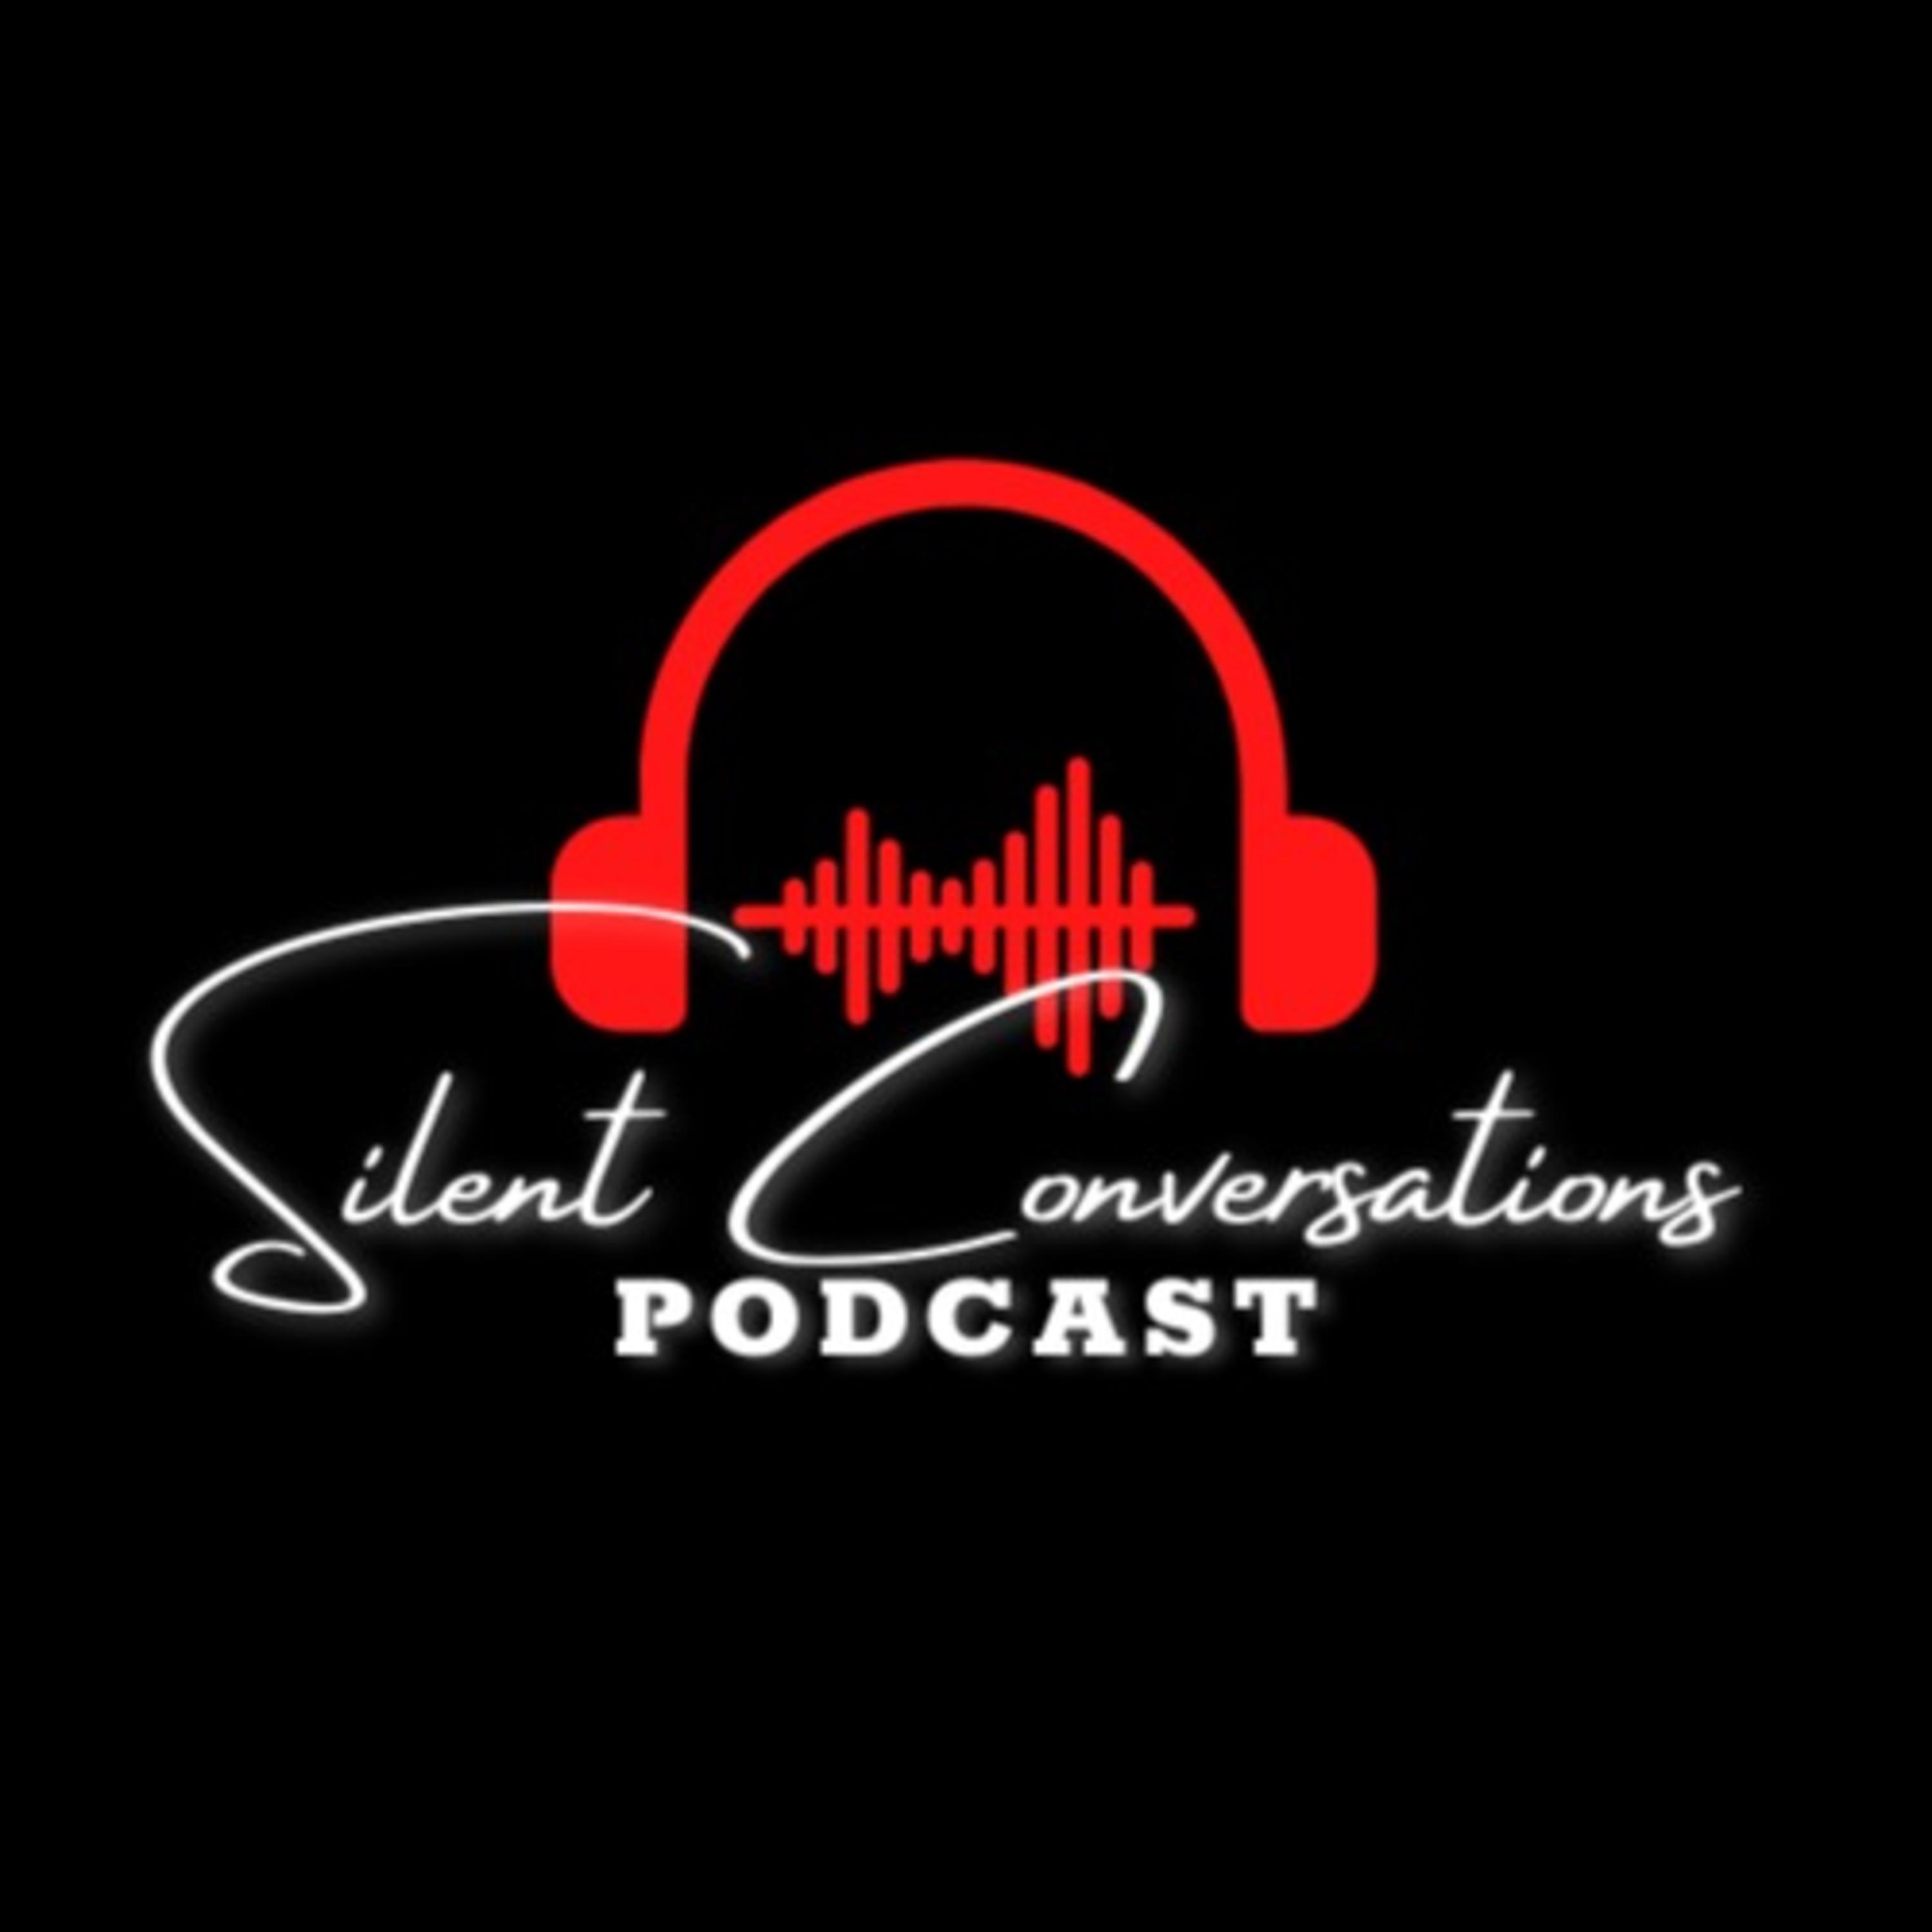 The Silent Conversations Podcast